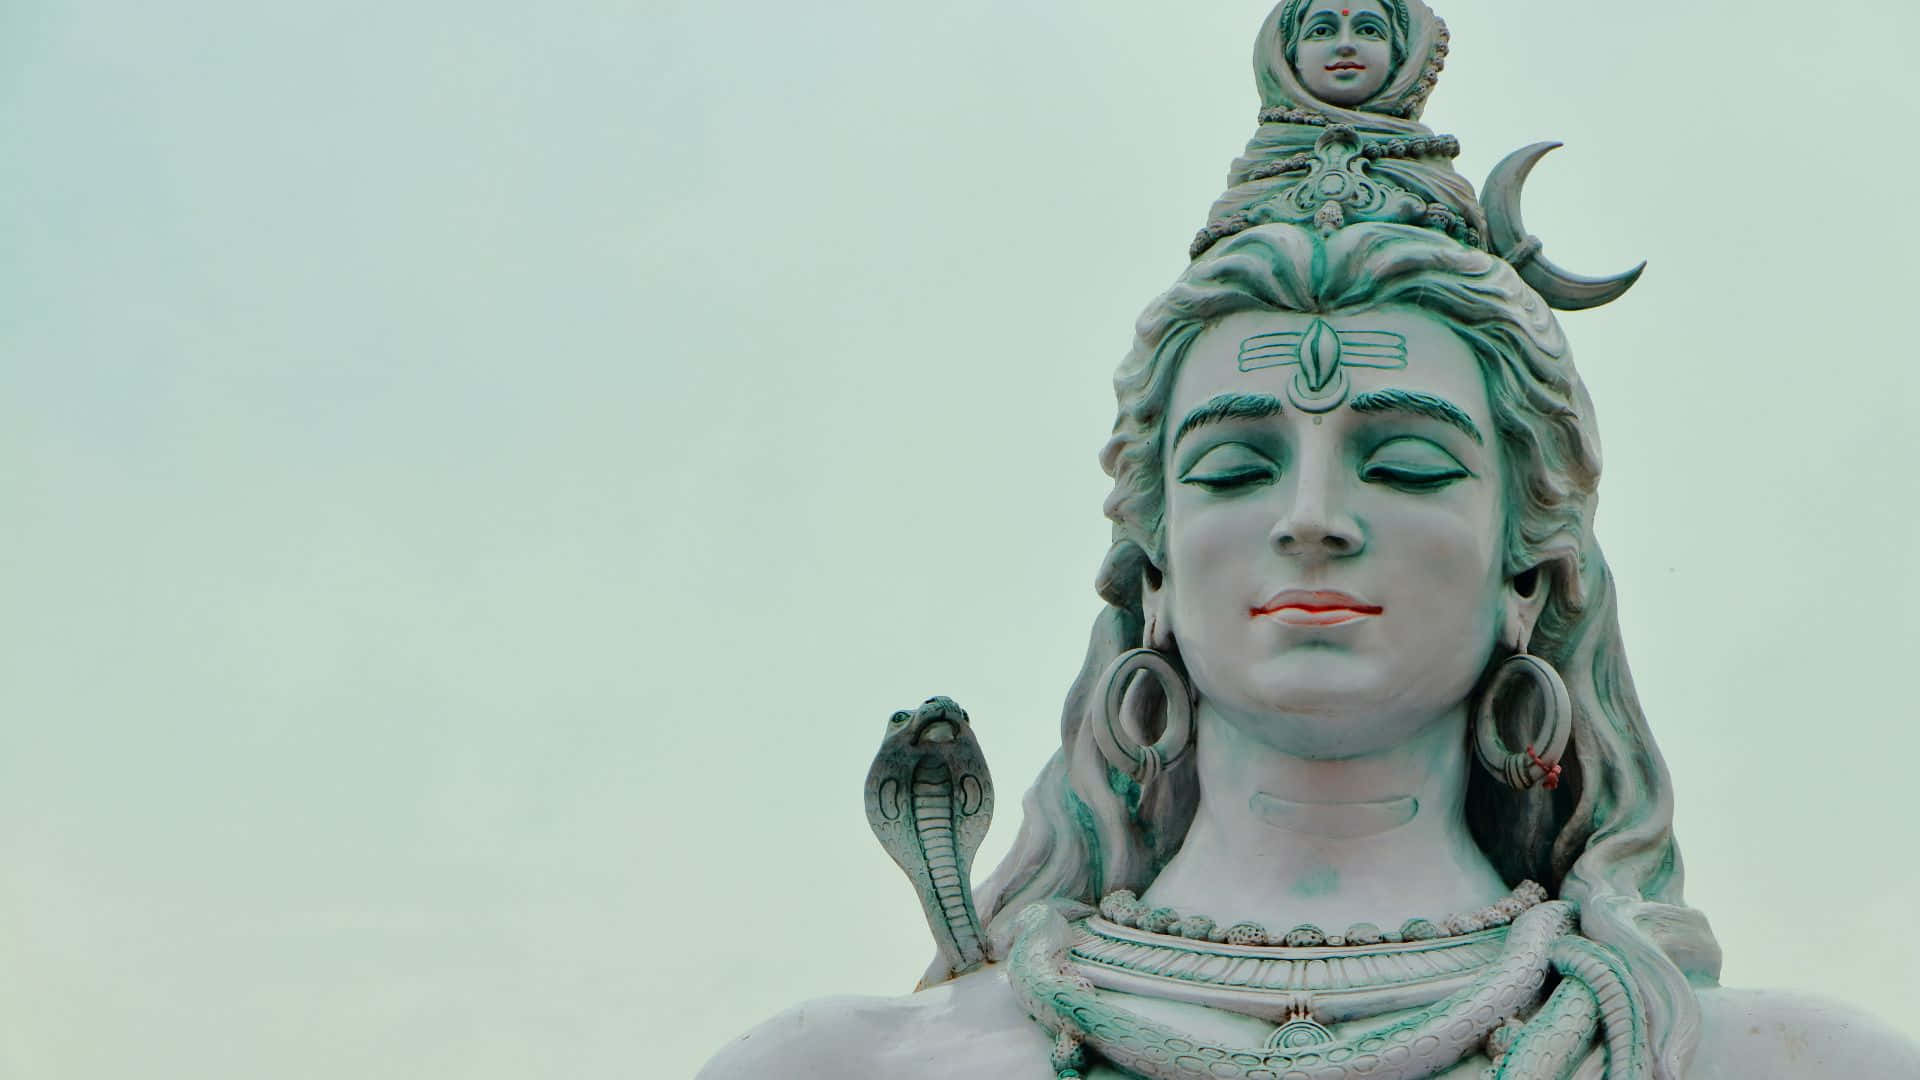 Lord Shiva, the destroyer and protector